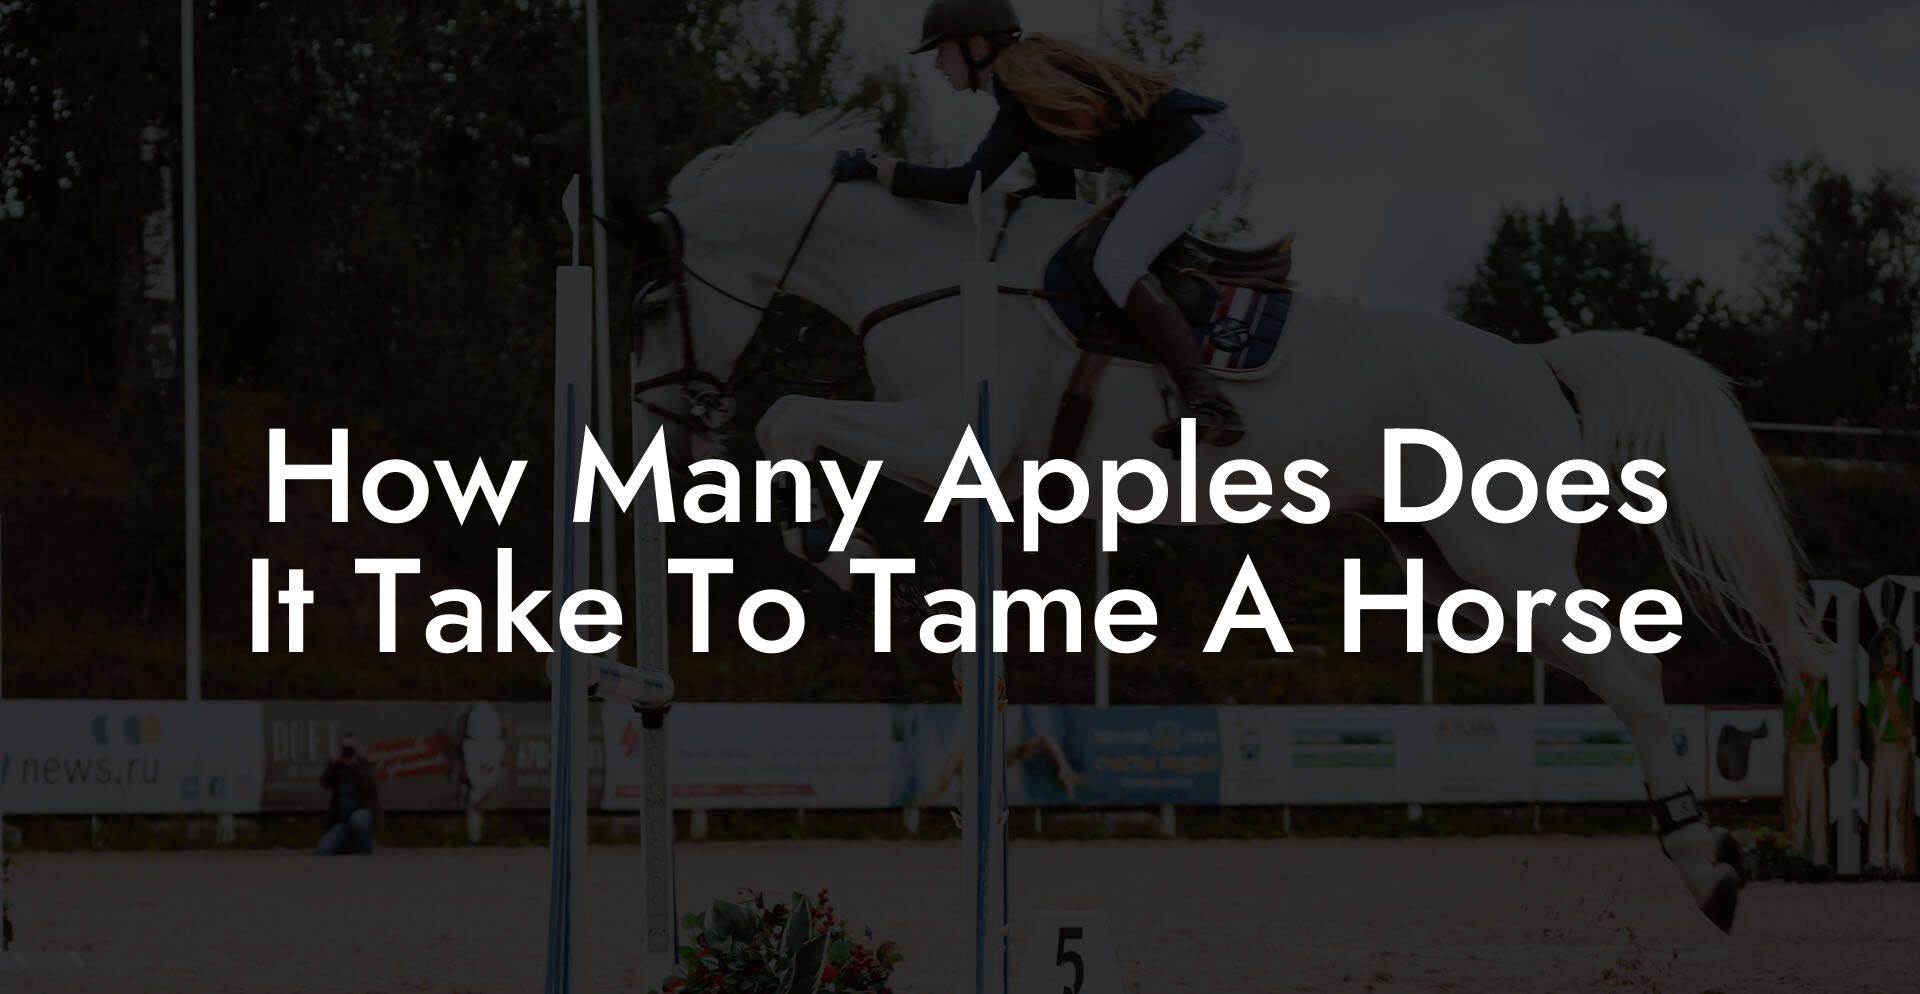 How Many Apples Does It Take To Tame A Horse